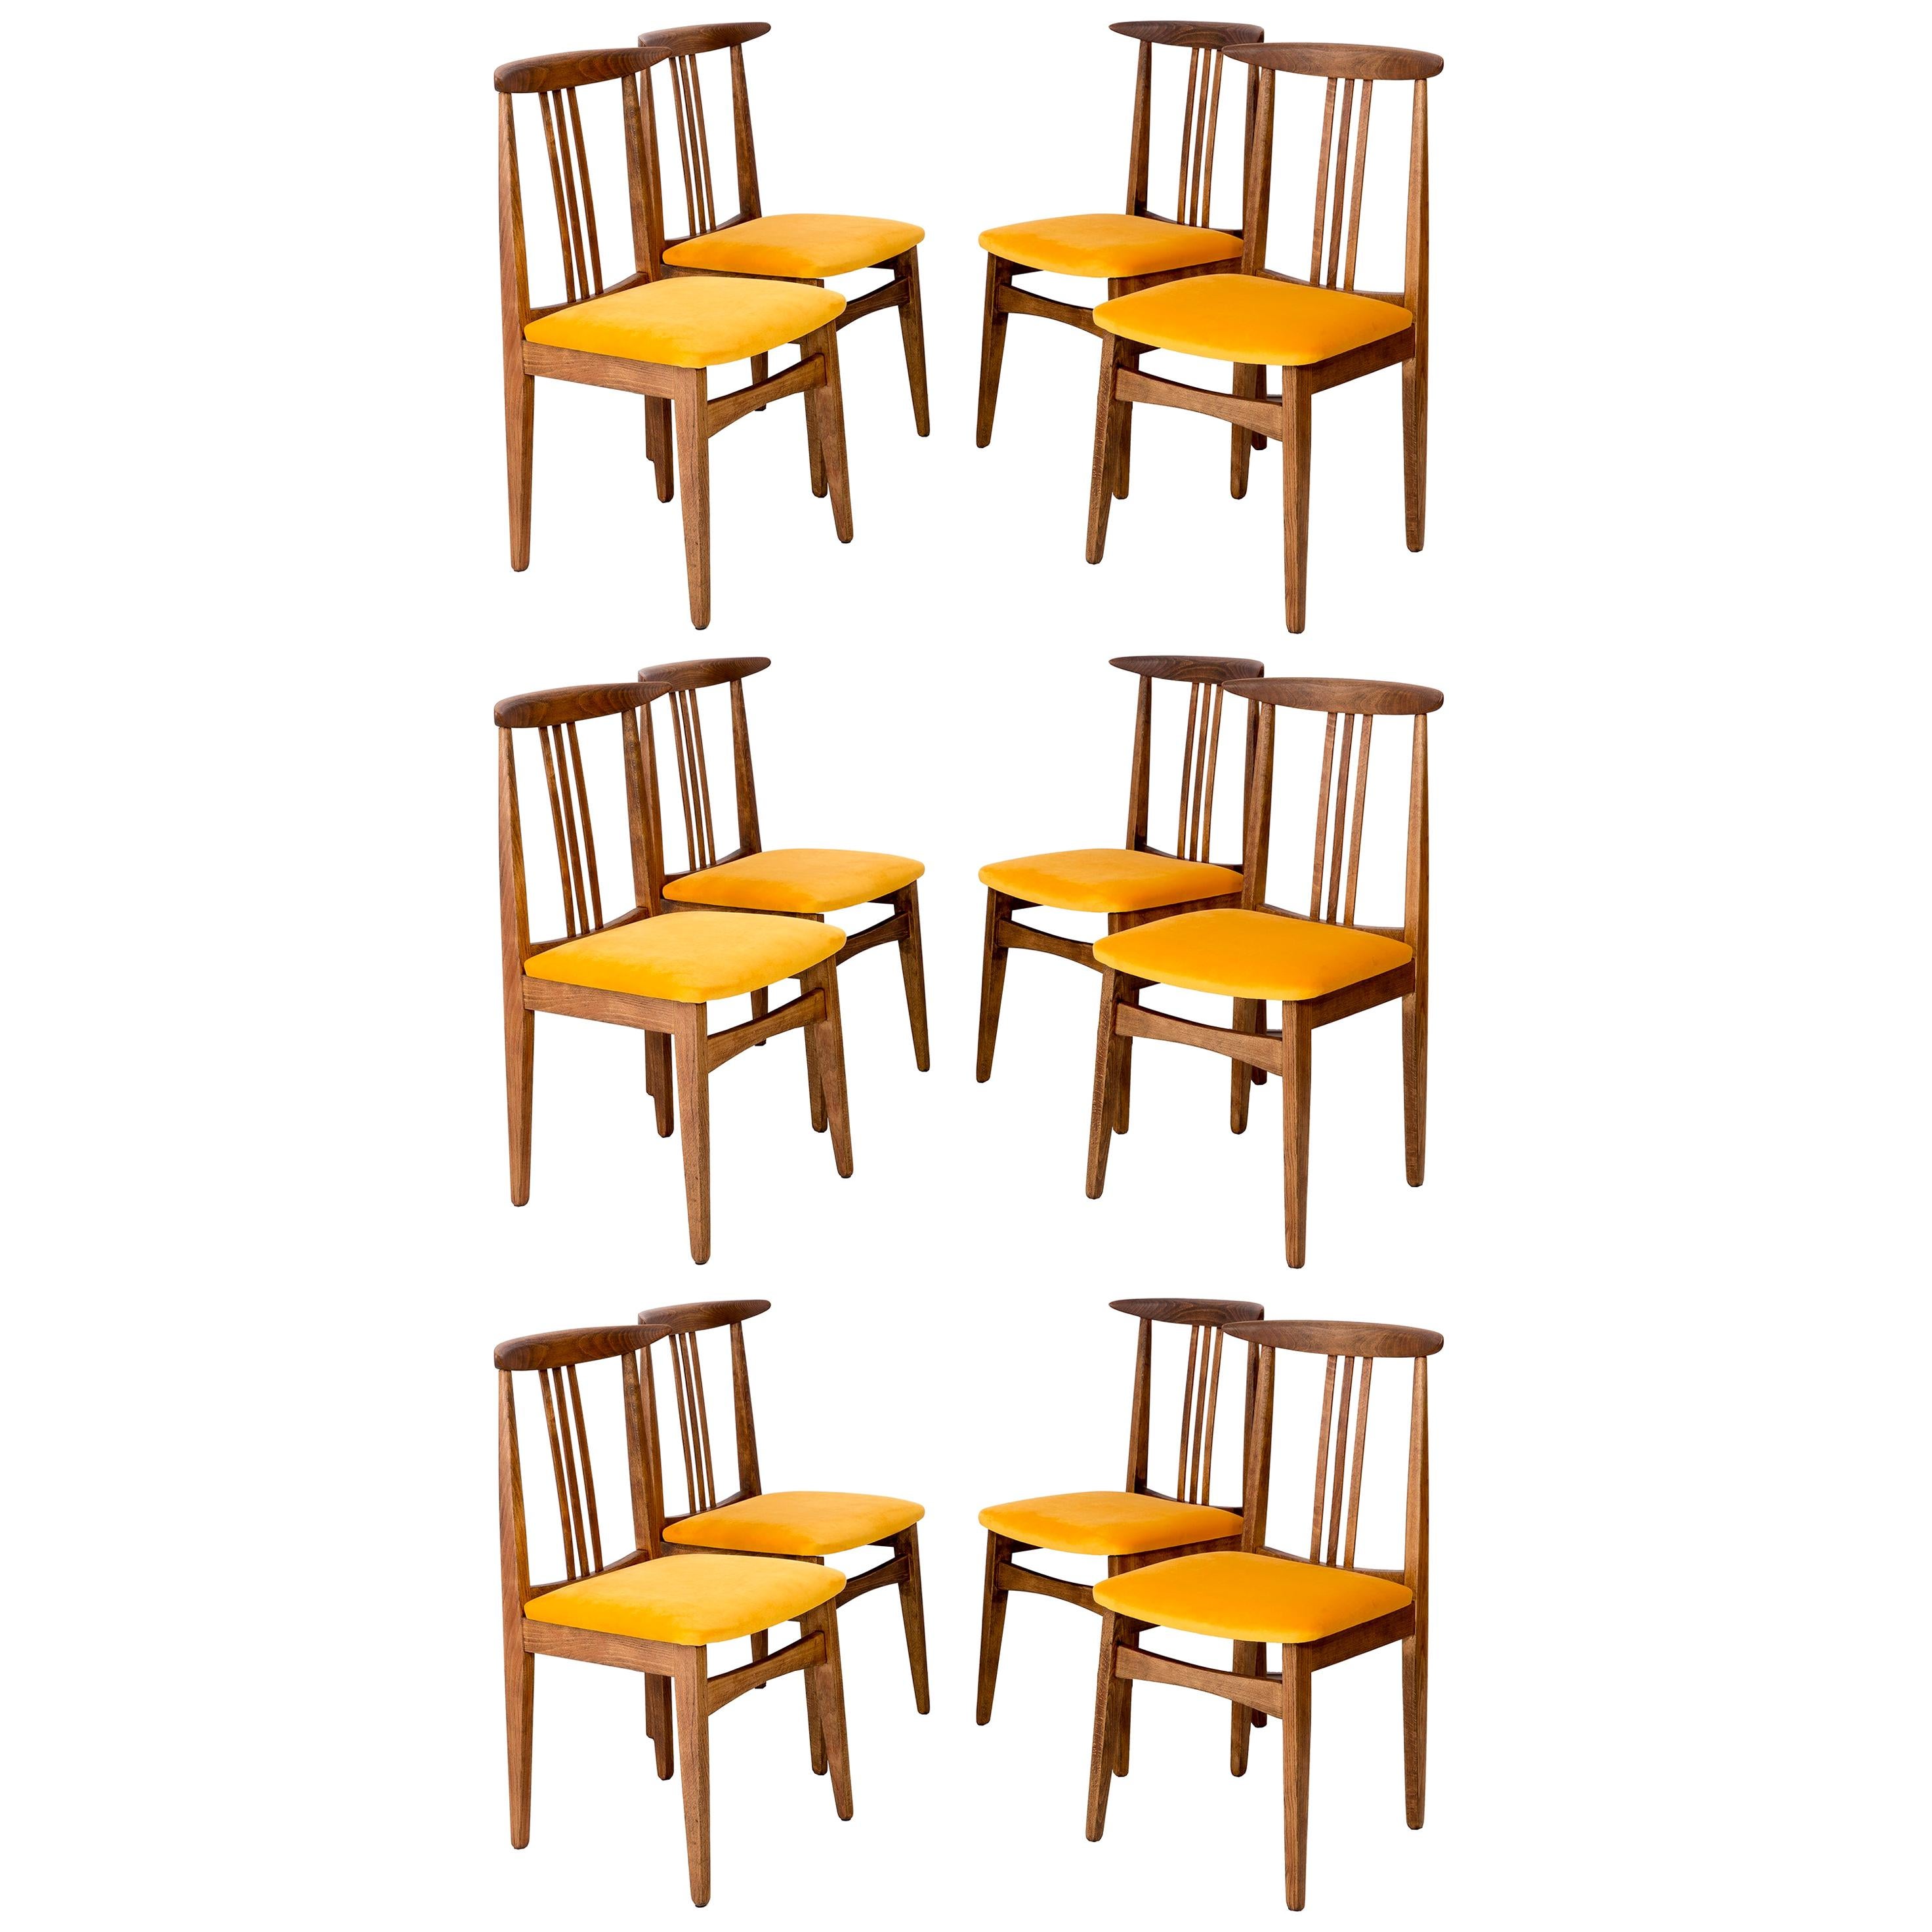 Set of Twelve Yellow Chairs, by Zielinski, Europe, 1960s For Sale